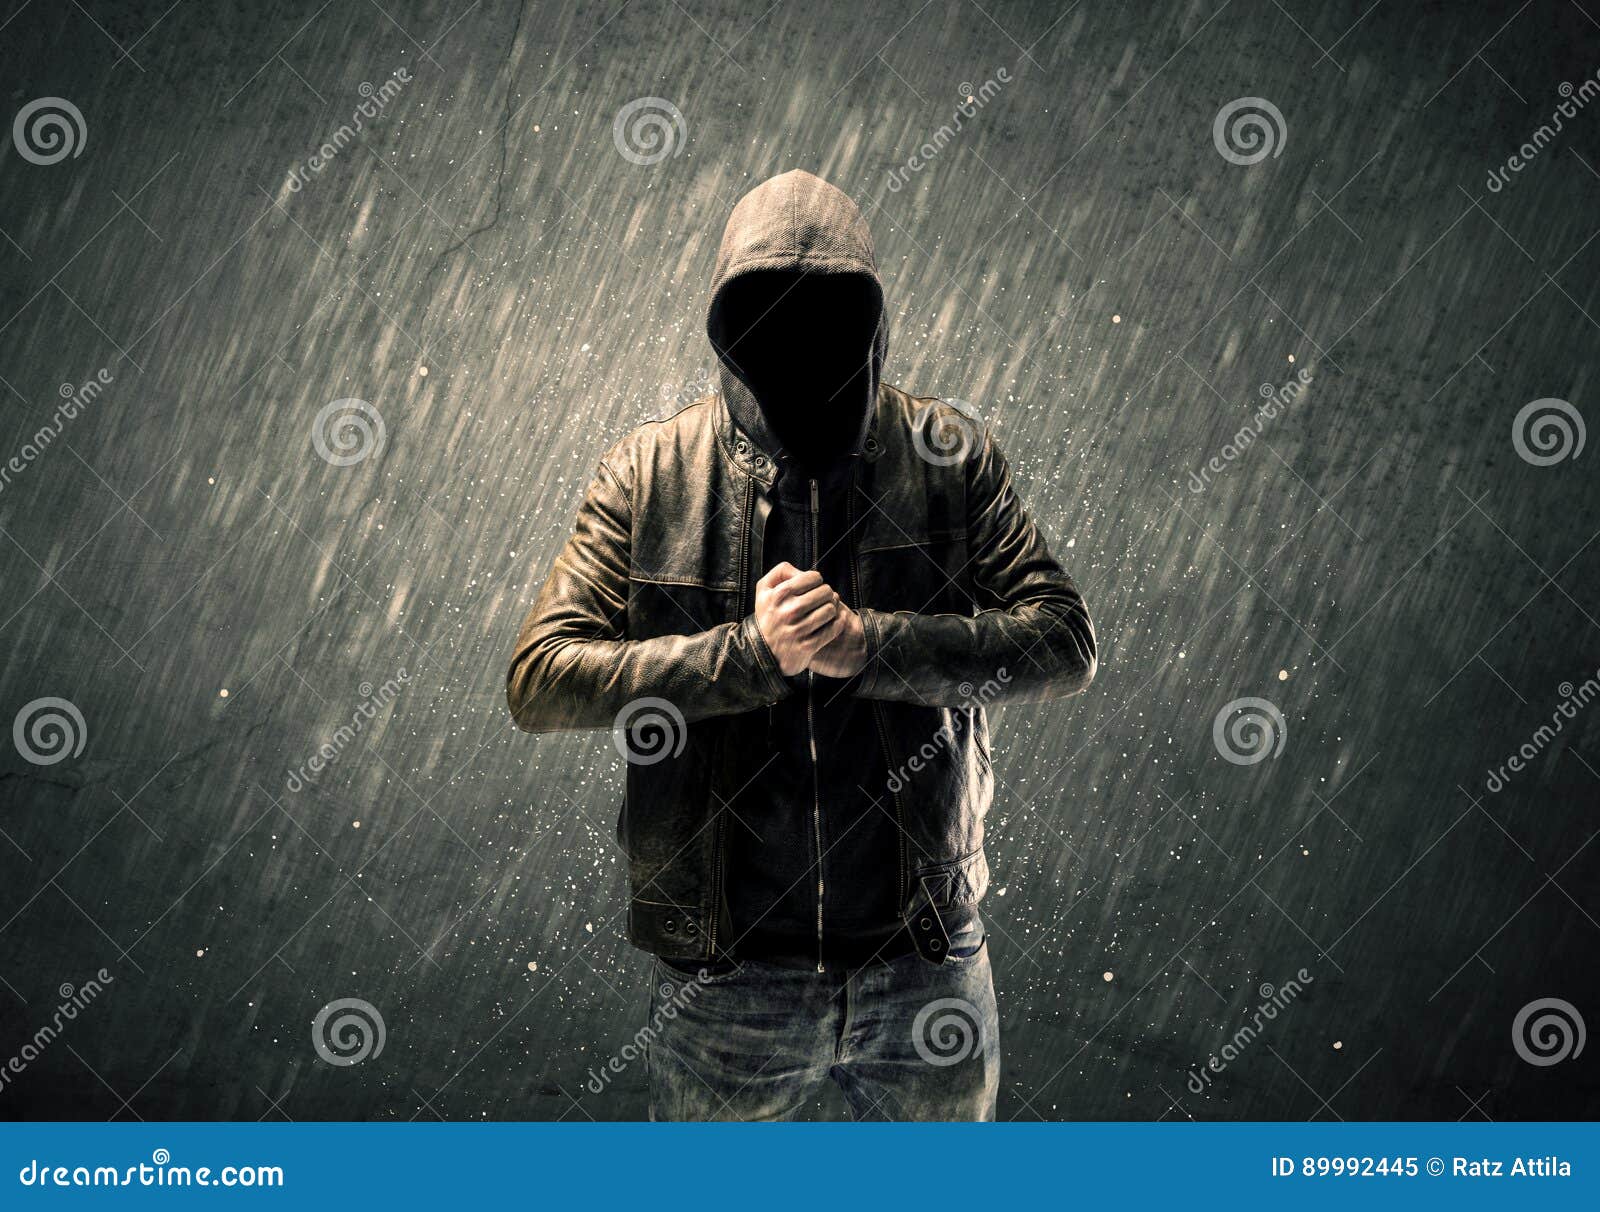 Spooky Faceless Guy Standing In Hoodie Stock Image Image Of Mysterious Criminal 89992445 